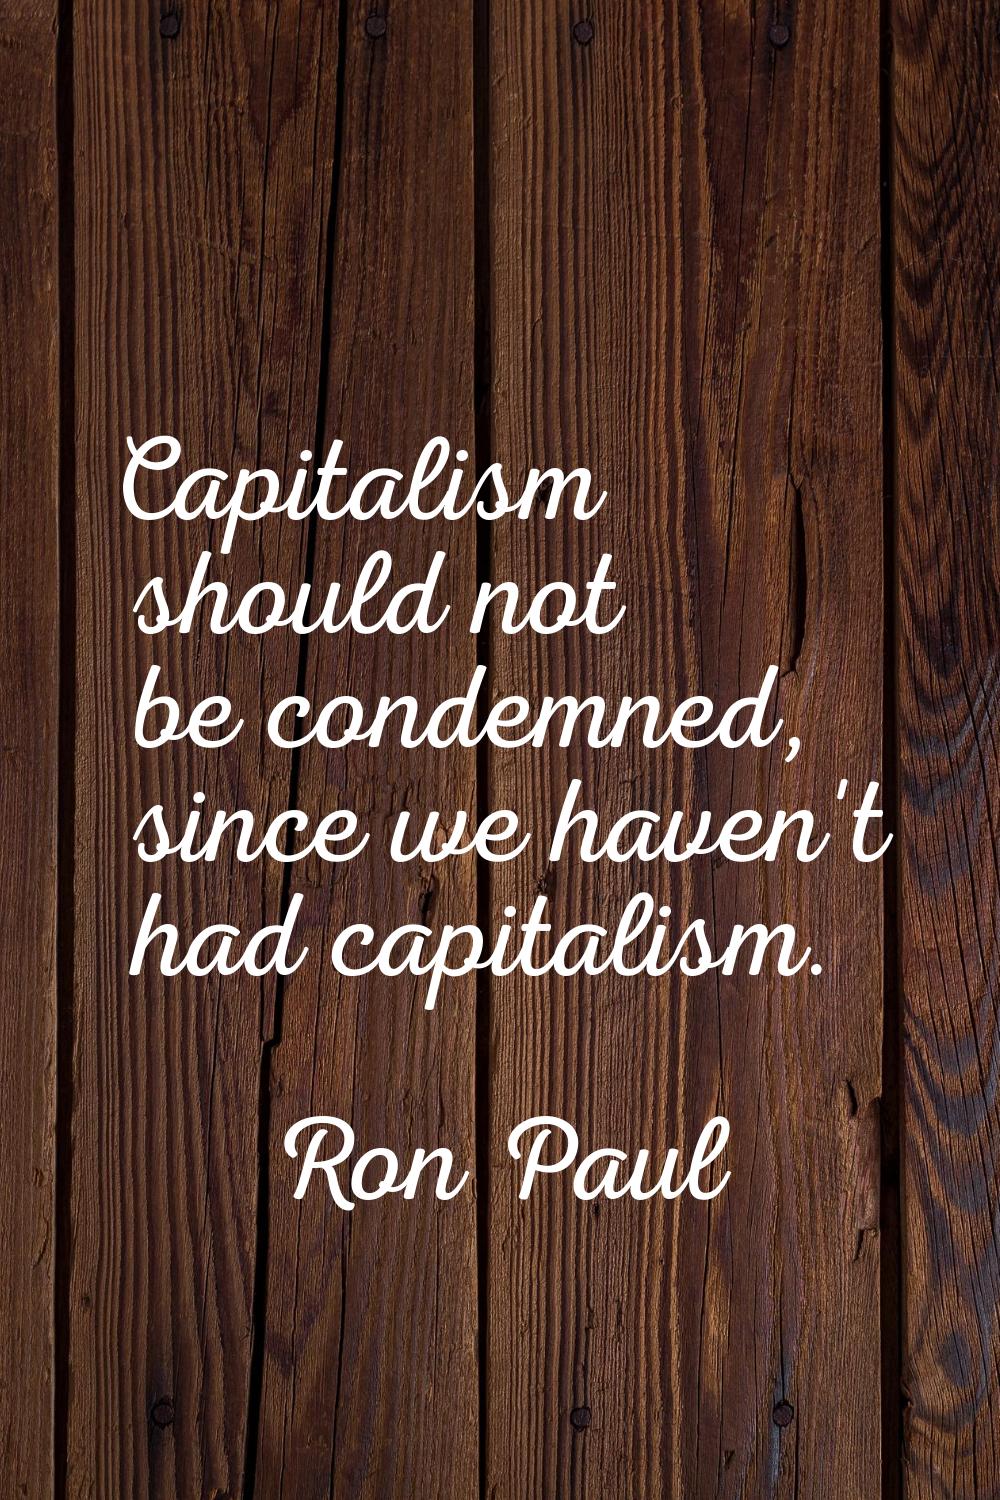 Capitalism should not be condemned, since we haven't had capitalism.